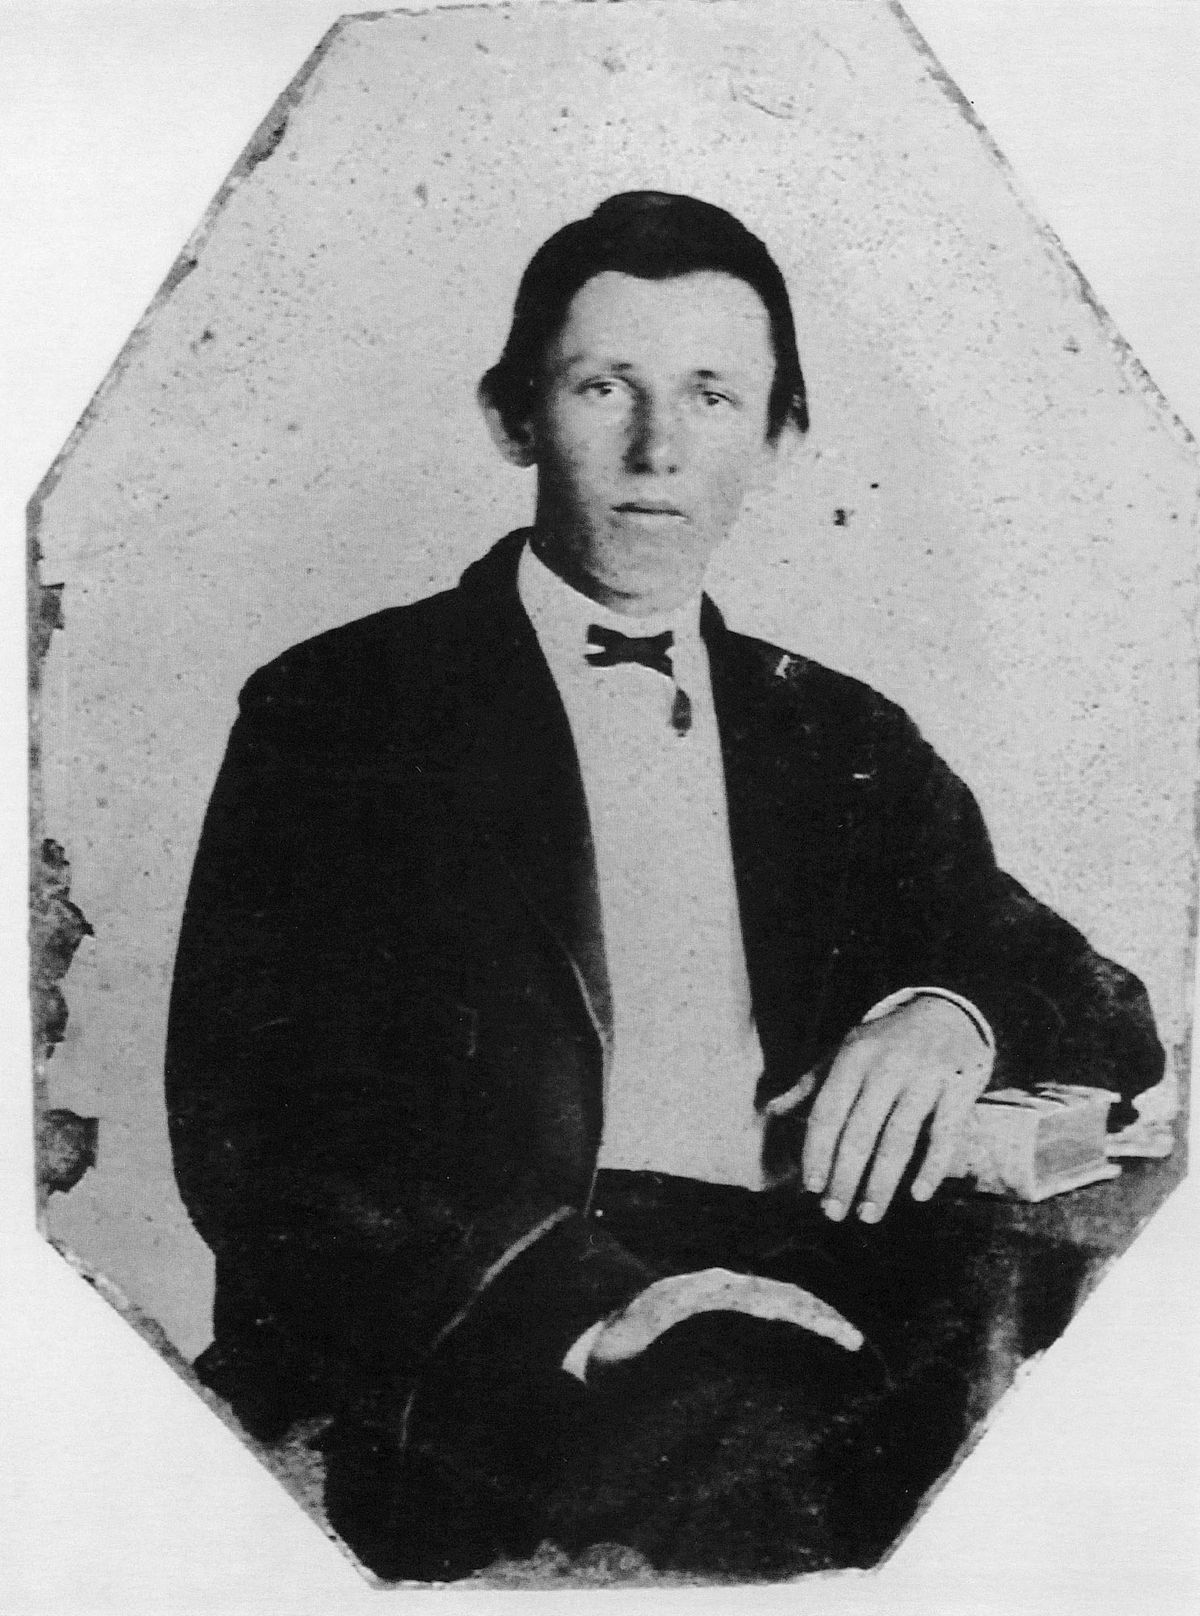 This undated file photo is thought to be an image of famed gunslinger Billy the Kid, William Bonney, near the age of 18. A newly discovered document, dated July 9, 1908, and found in southern New Mexico is shedding more light on the shooting death of Pat Garrett, the Old West lawman who gained fame for killing Bonney. (Associated Press)